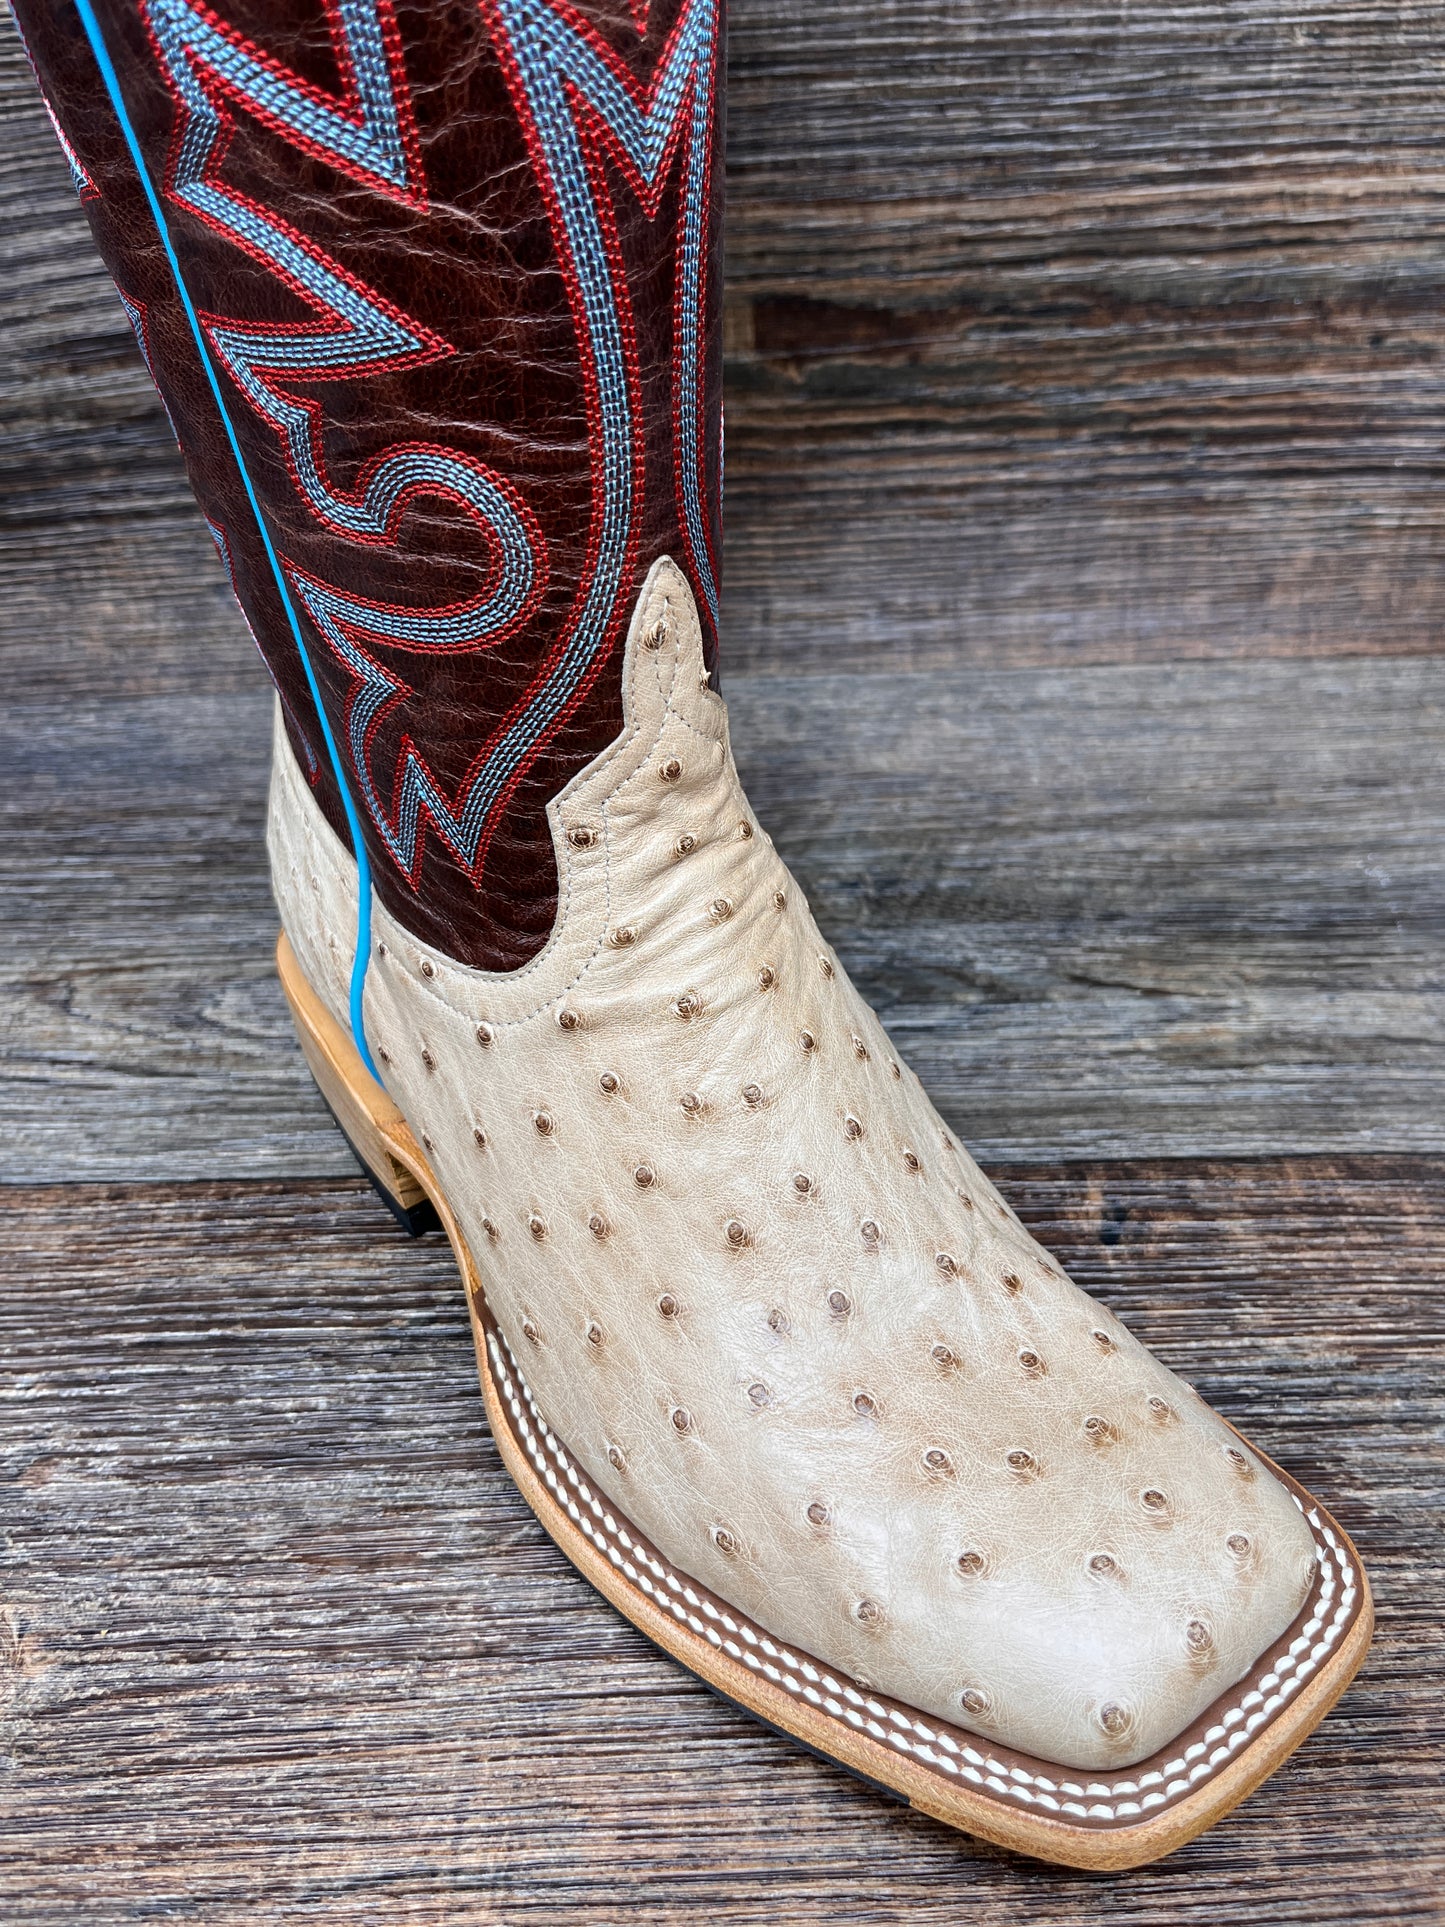 hp8051 Men's Top Hand Full Quill Ostrich Western Boots by Horse Power